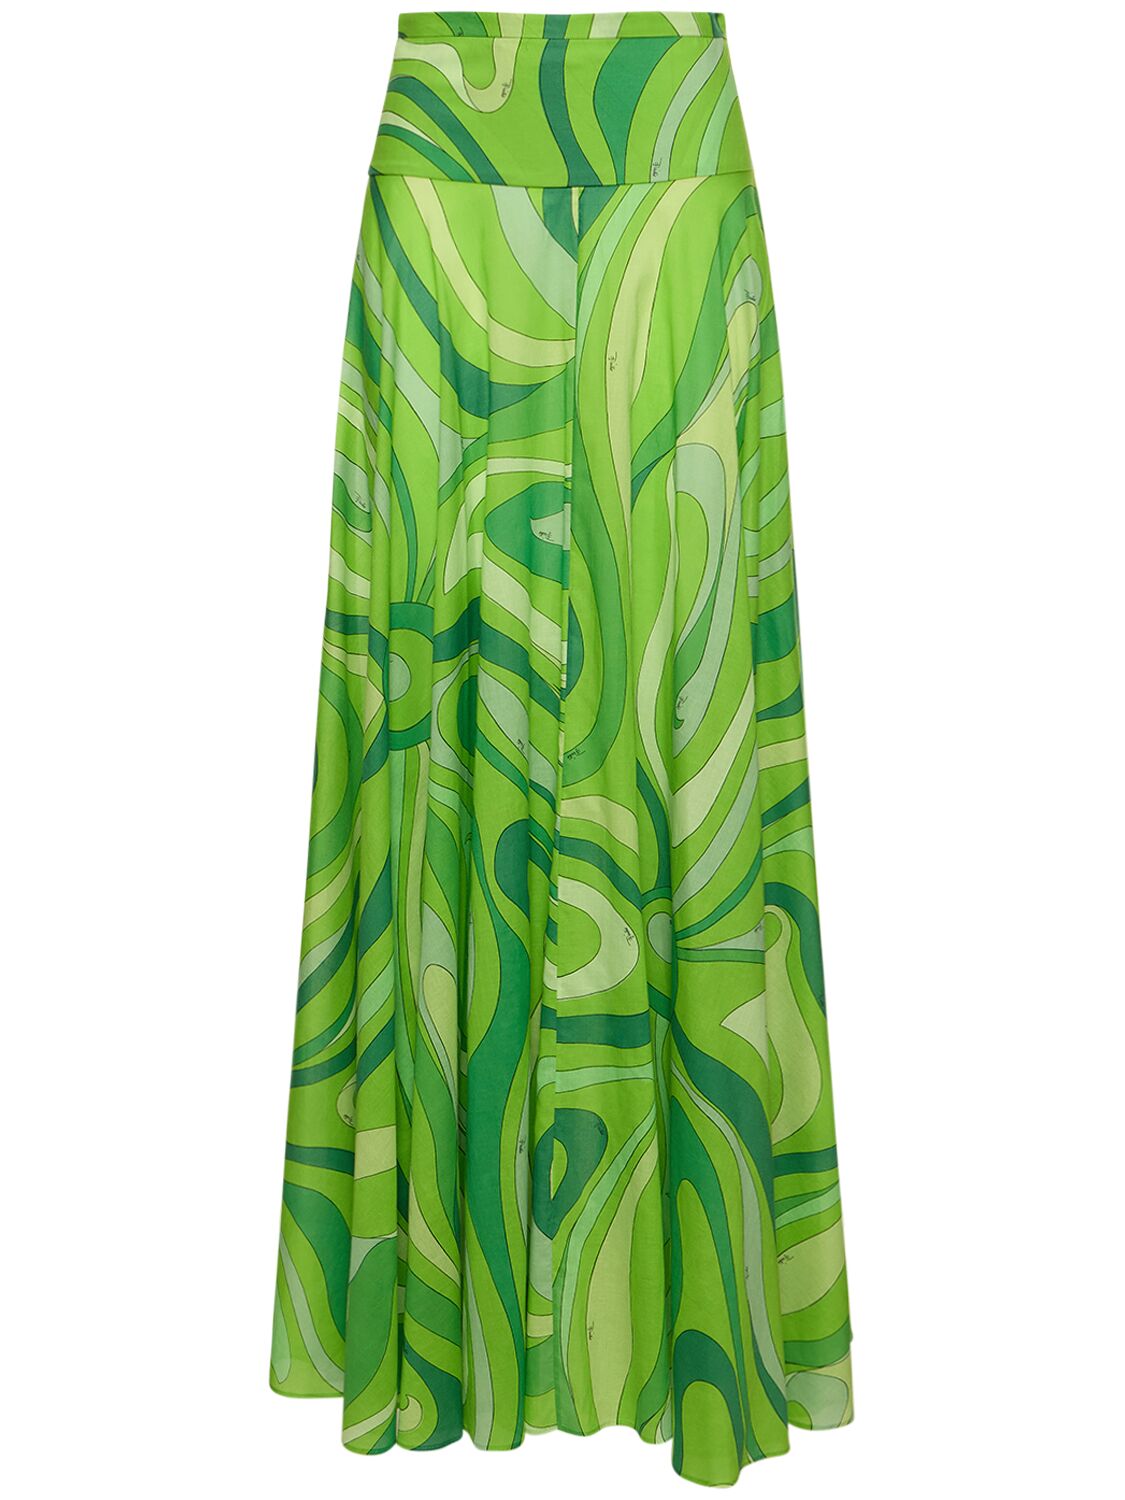 Pucci Marmo Printed Cotton Muslin Maxi Skirt In Green